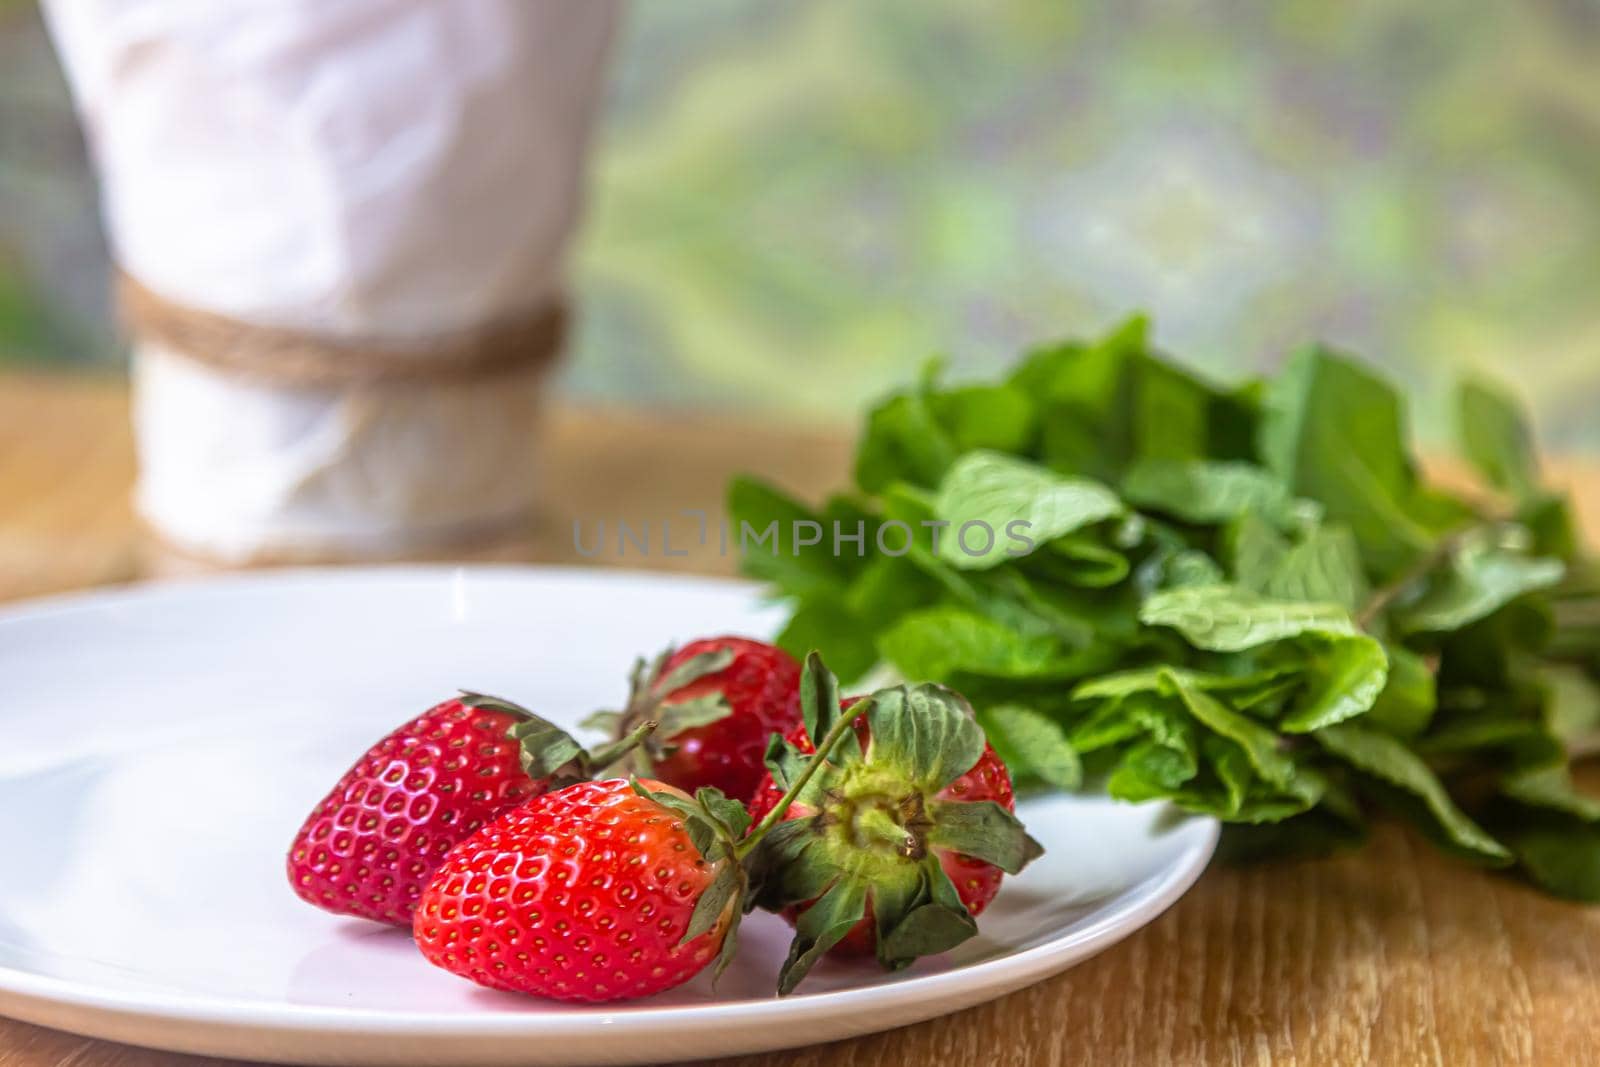 Fresh strawberries and mint - Ingredients for making healthy smoothie or summer drink cocktail. Closeup view by Milanchikov